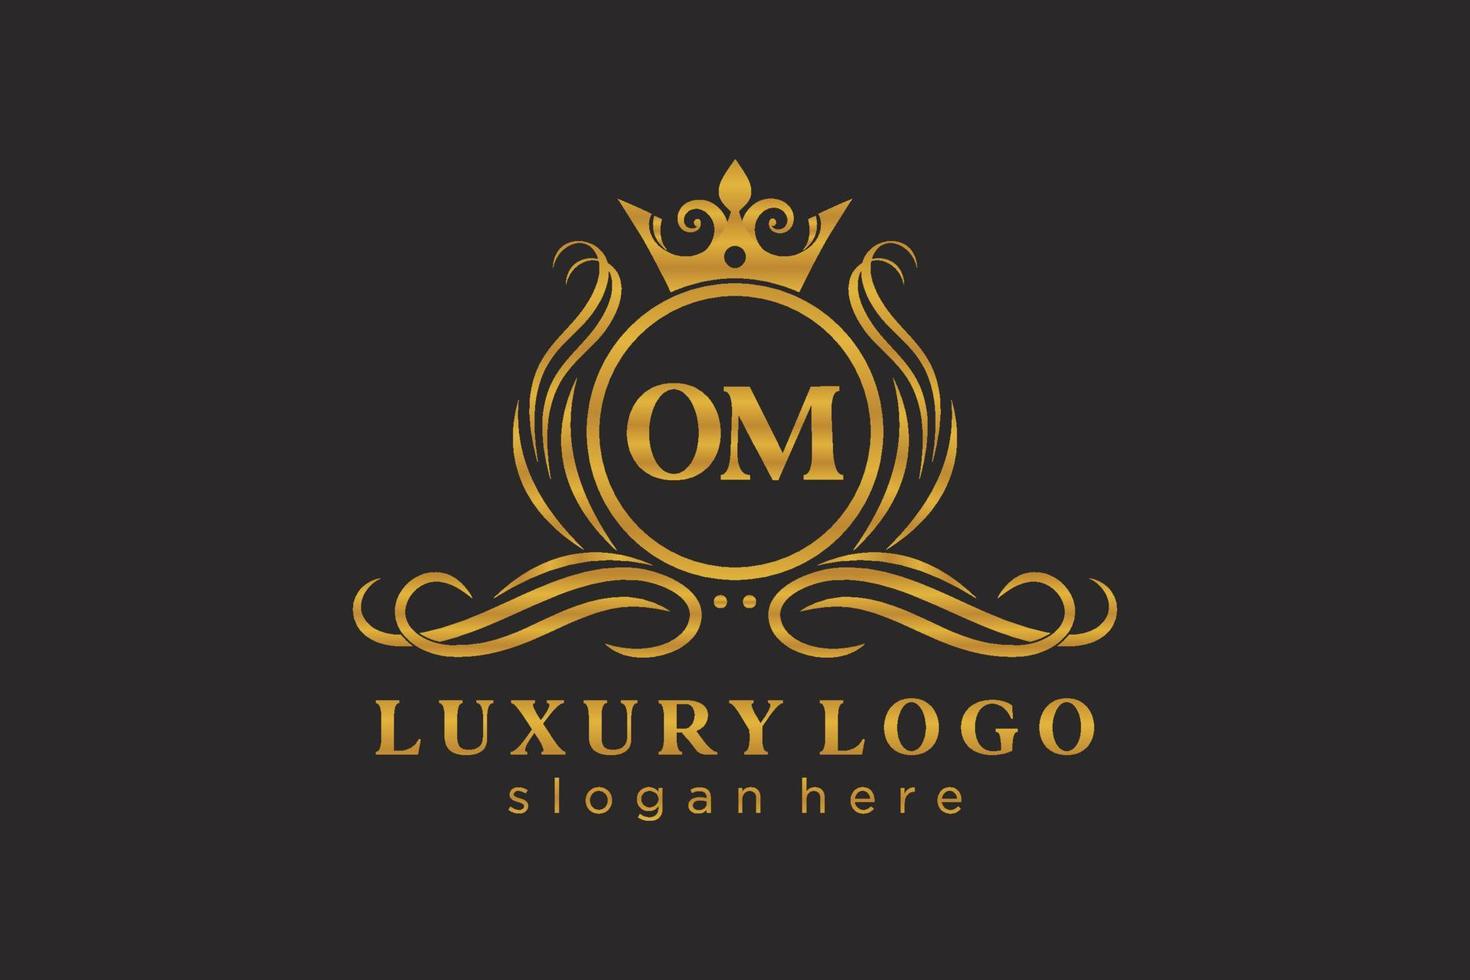 Initial OM Letter Royal Luxury Logo template in vector art for Restaurant, Royalty, Boutique, Cafe, Hotel, Heraldic, Jewelry, Fashion and other vector illustration.